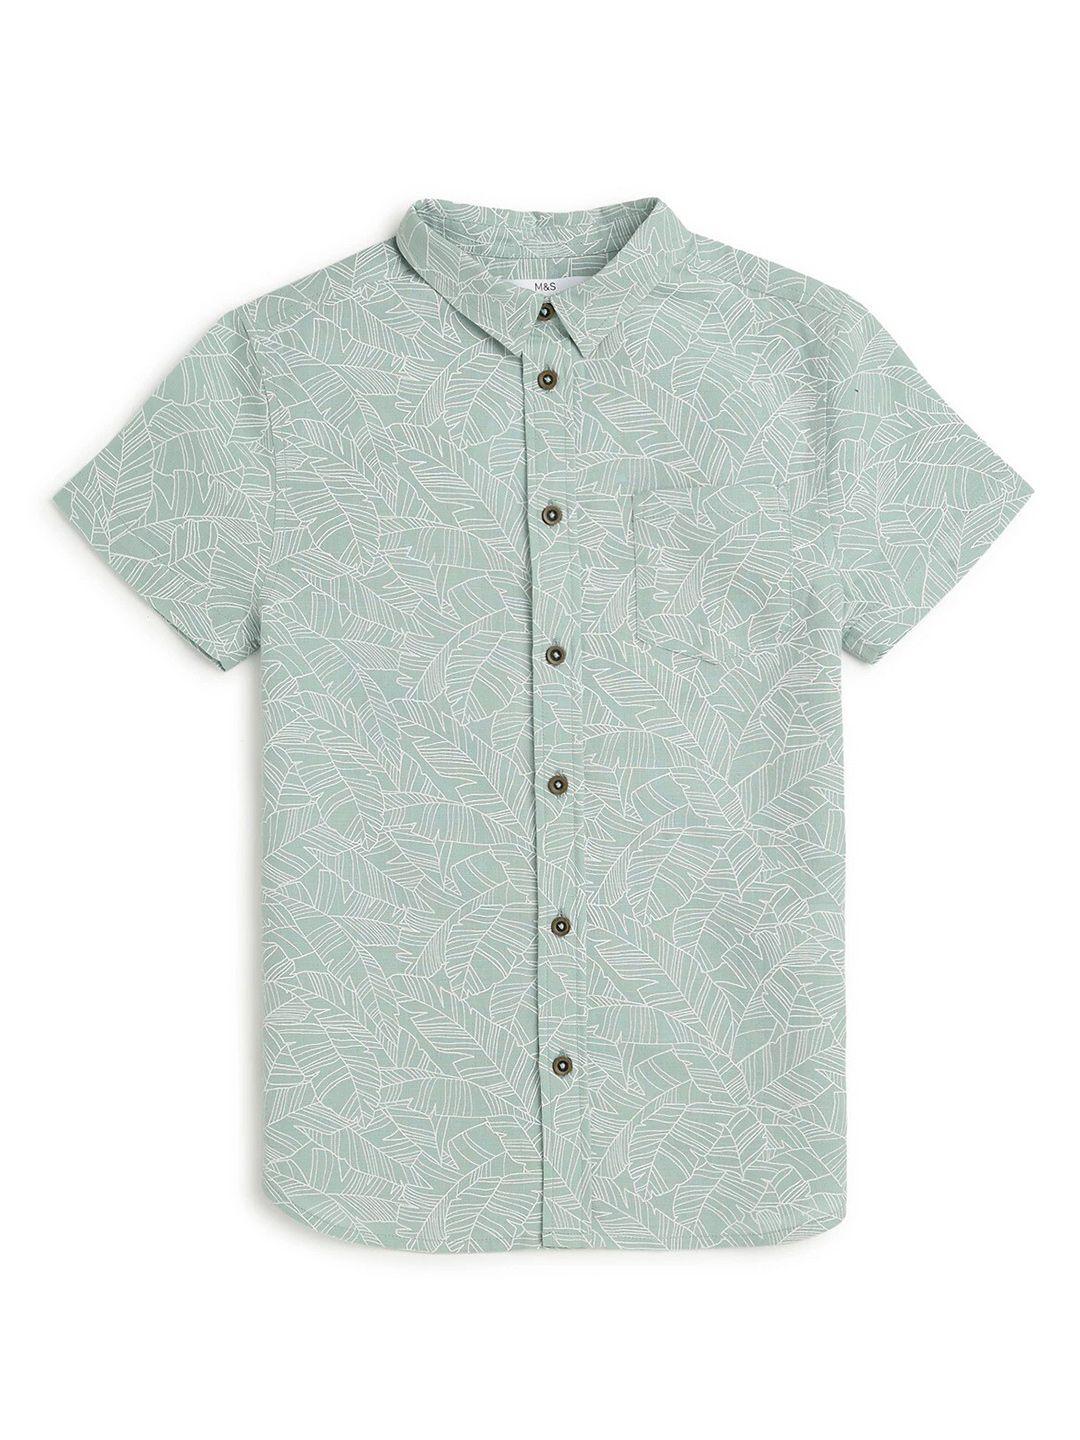 marks-&-spencer-boys-floral-printed-casual-shirt